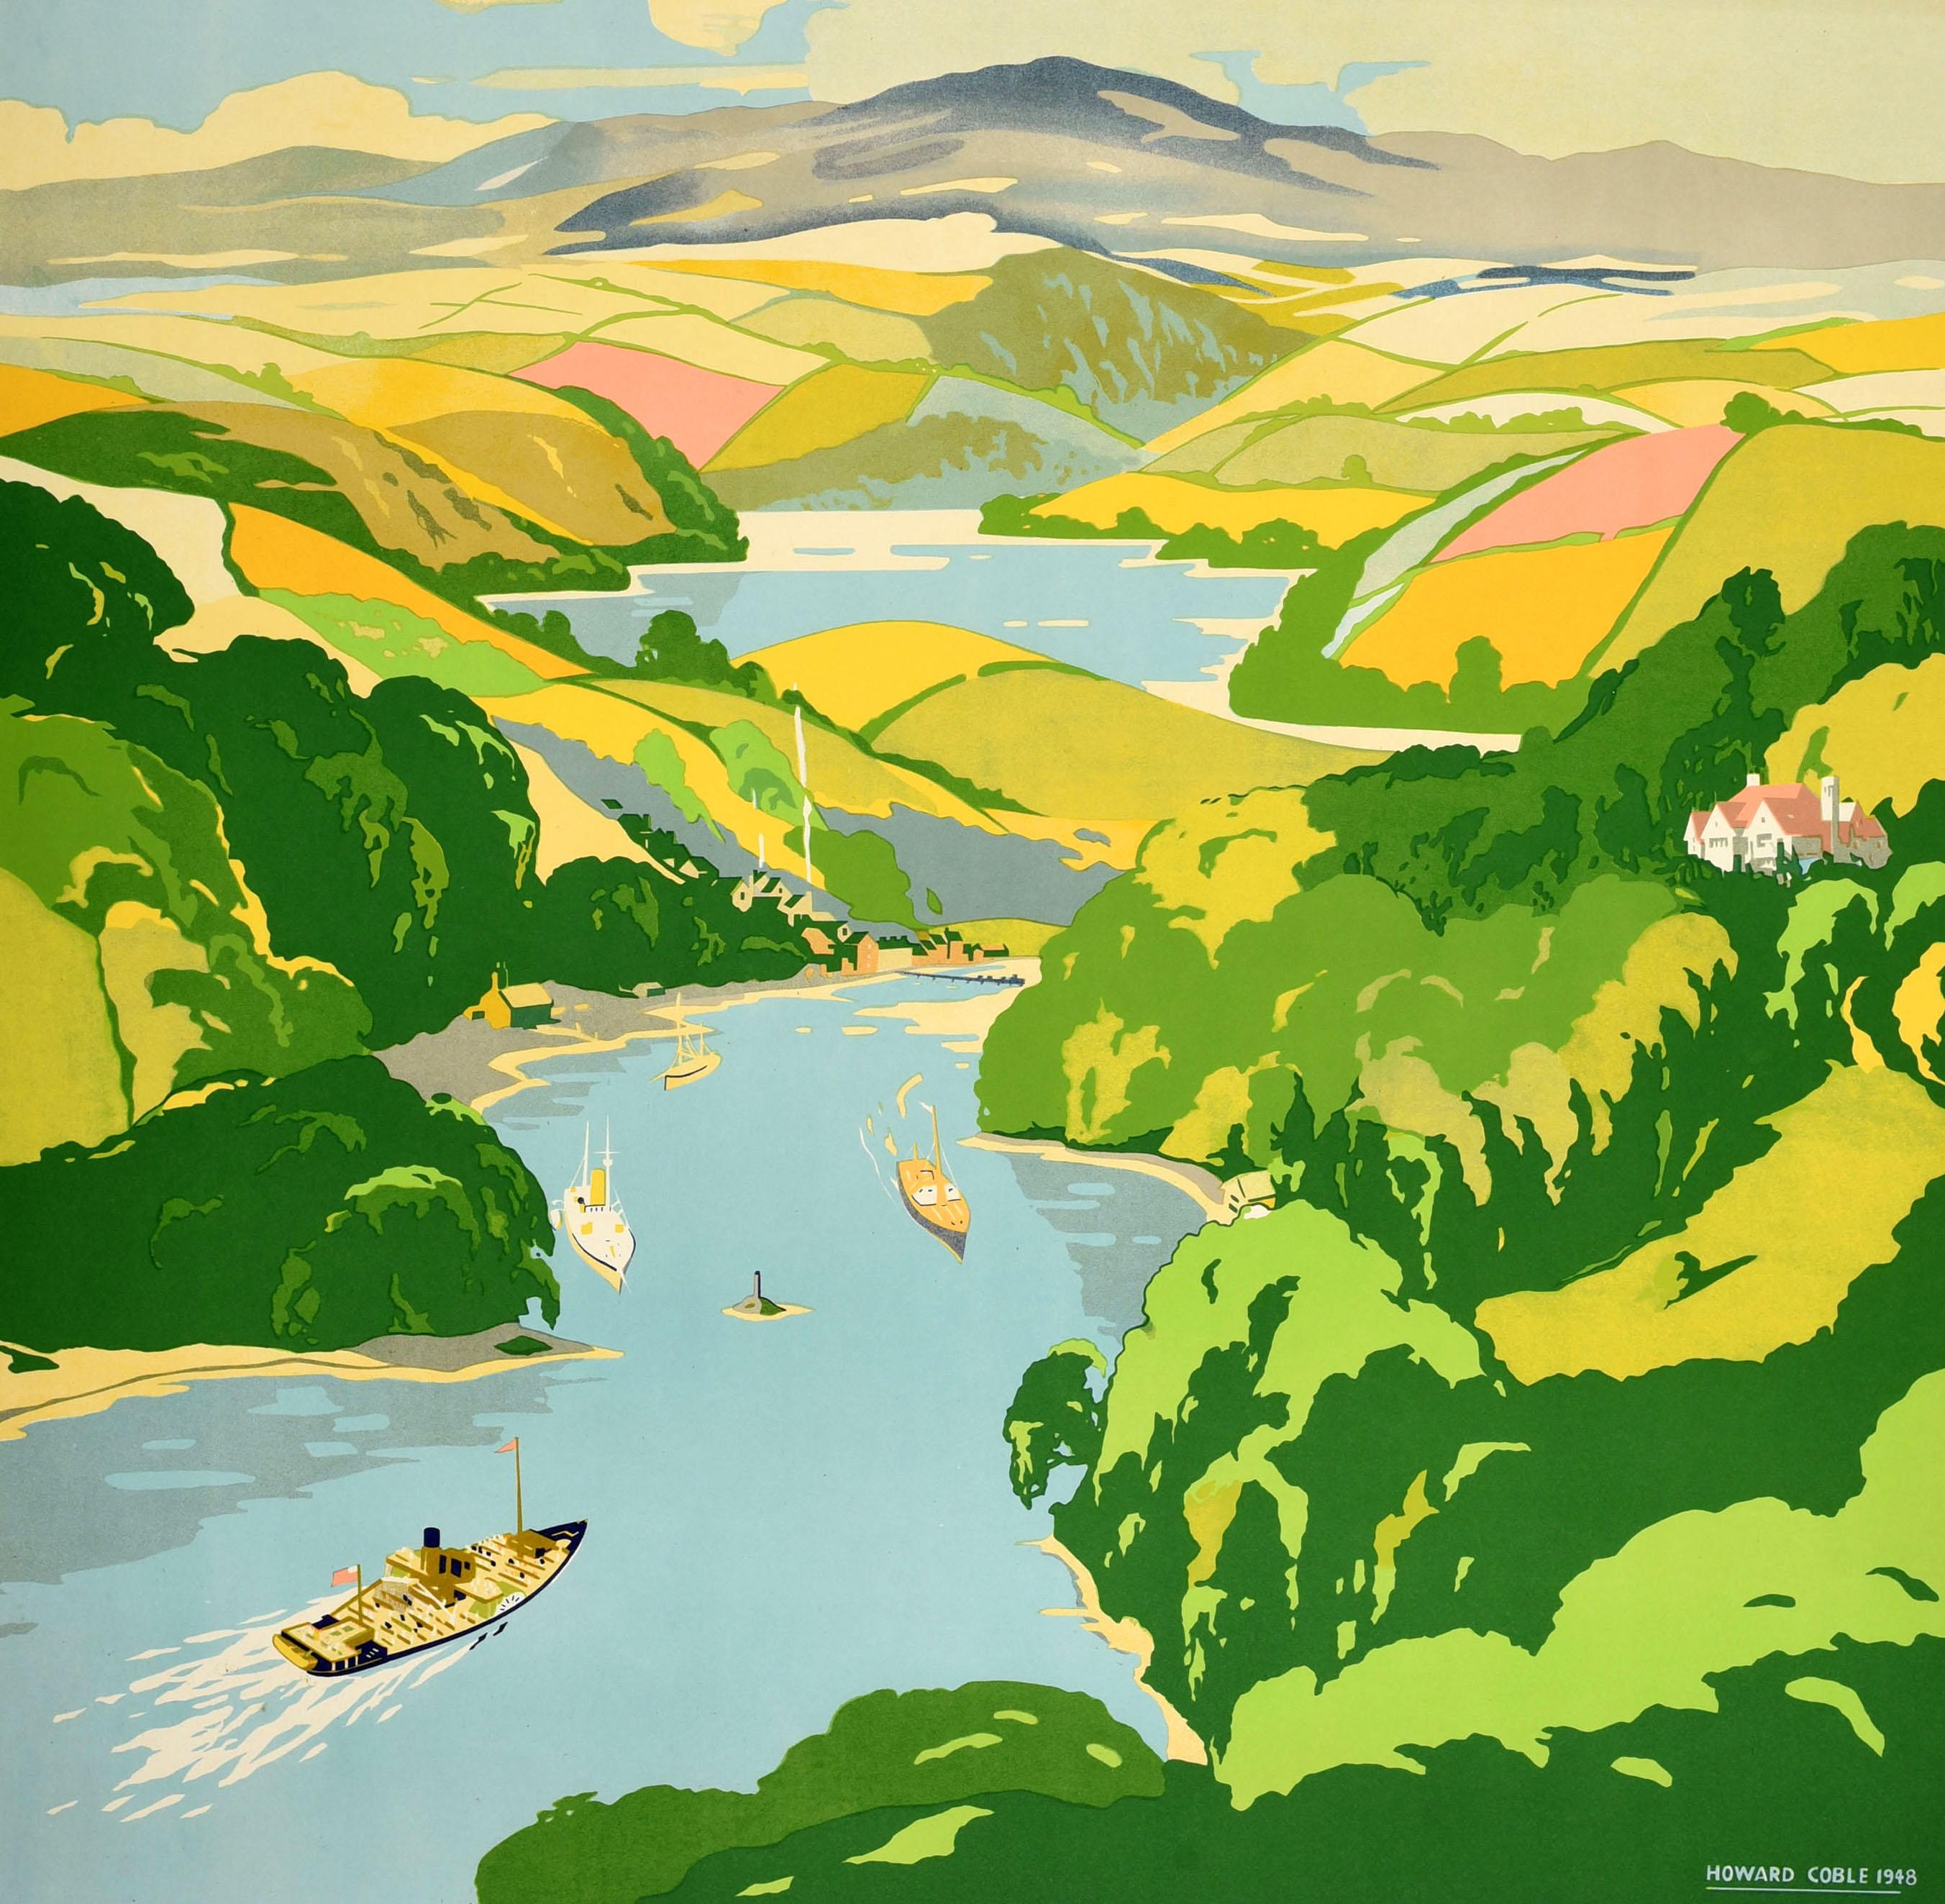 Original vintage travel advertising poster - River Dart Trip covering the whole navigable River Dart River Dart Steamboat Co Ltd for combined road rail & river tours enquire at this station - featuring a scenic view of boats and paddle steamers